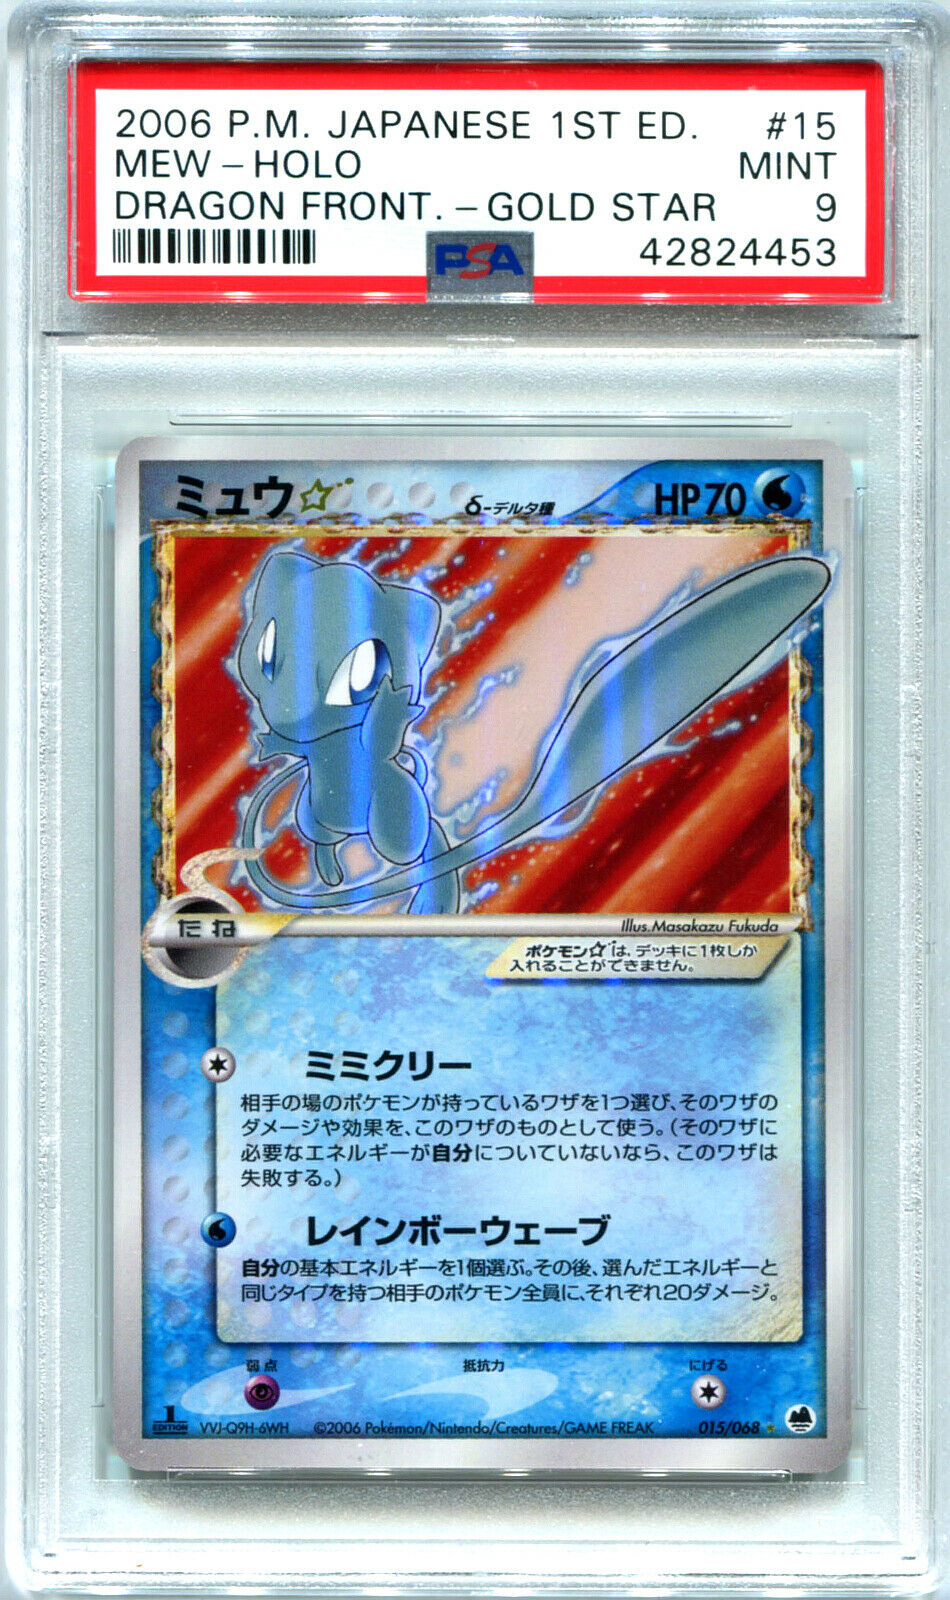 POKEMON JAPANESE PSA 9 MEW GOLD STAR EX DRAGON FRONTIERS 1ST ED MINT GRADED CARD